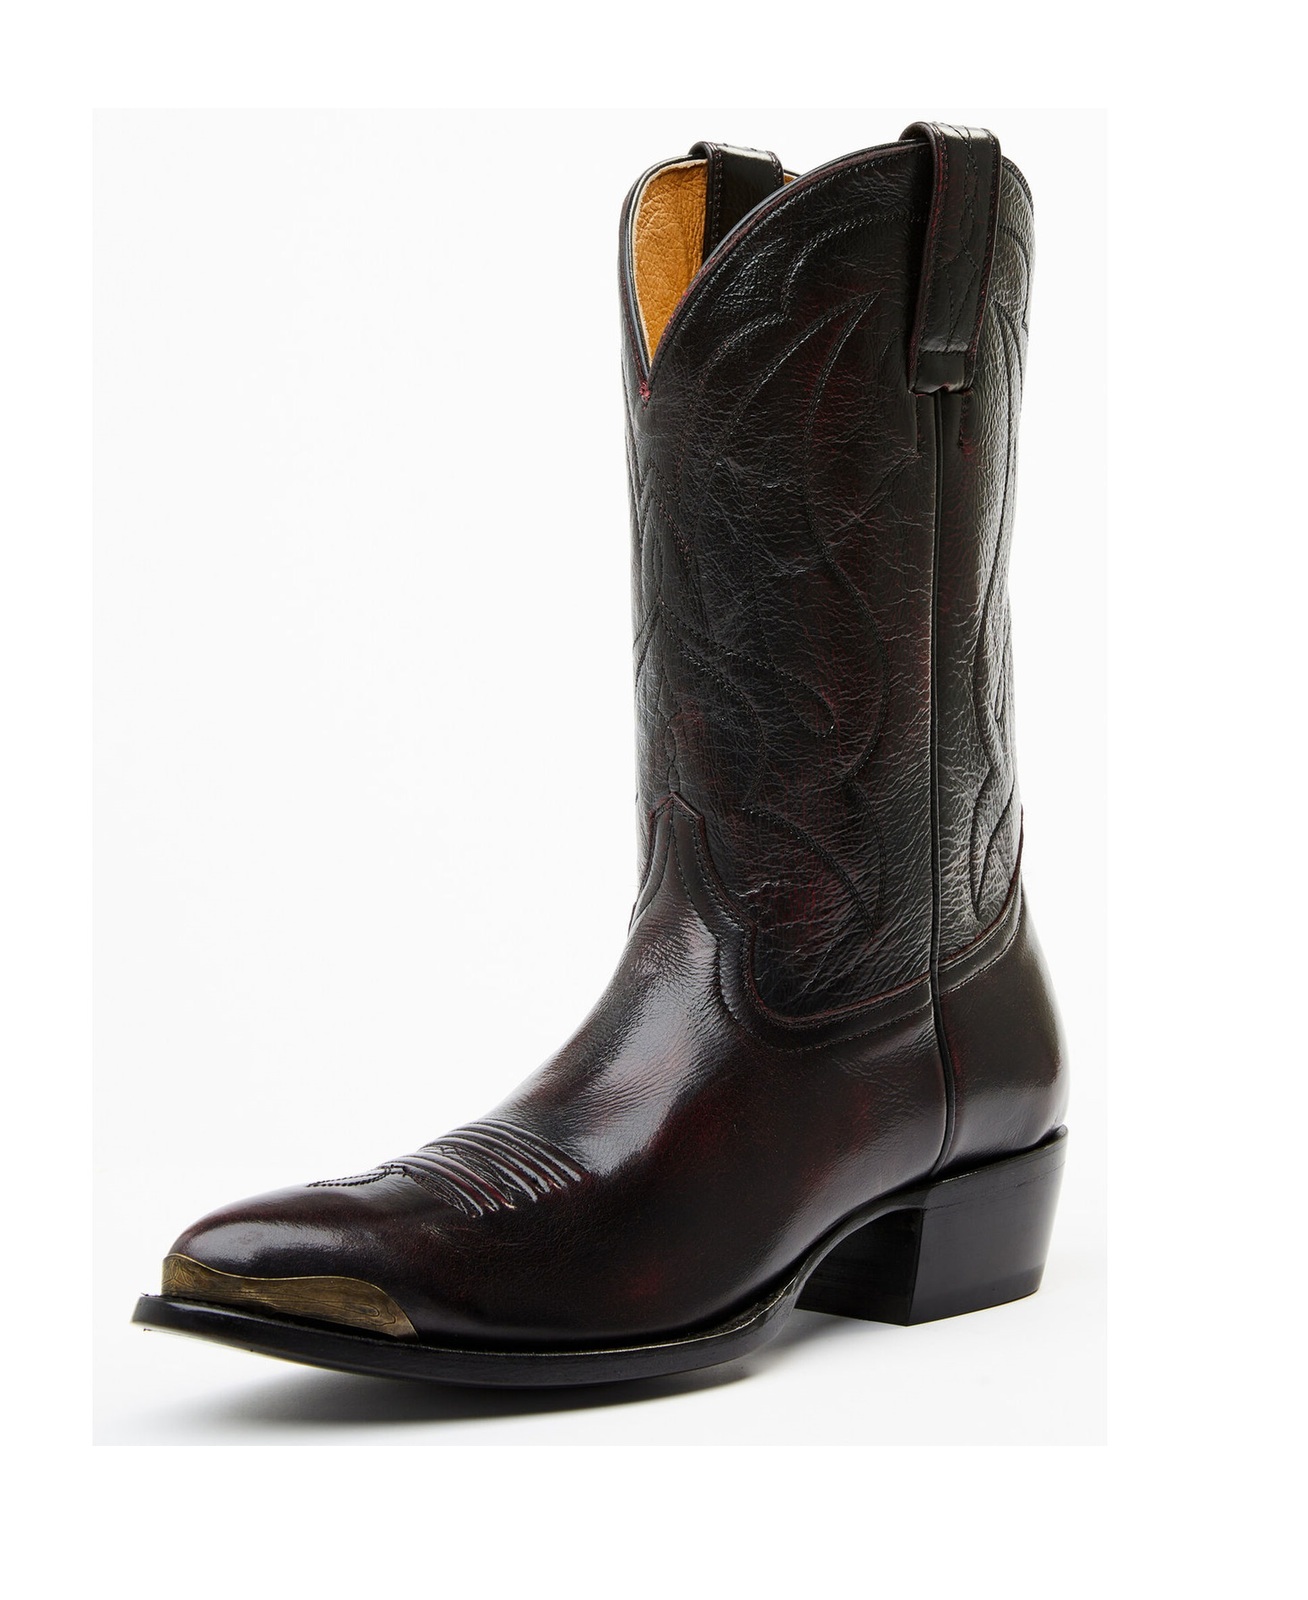 Primary image for Cody James Men's Roland Western Boots - Medium Toe